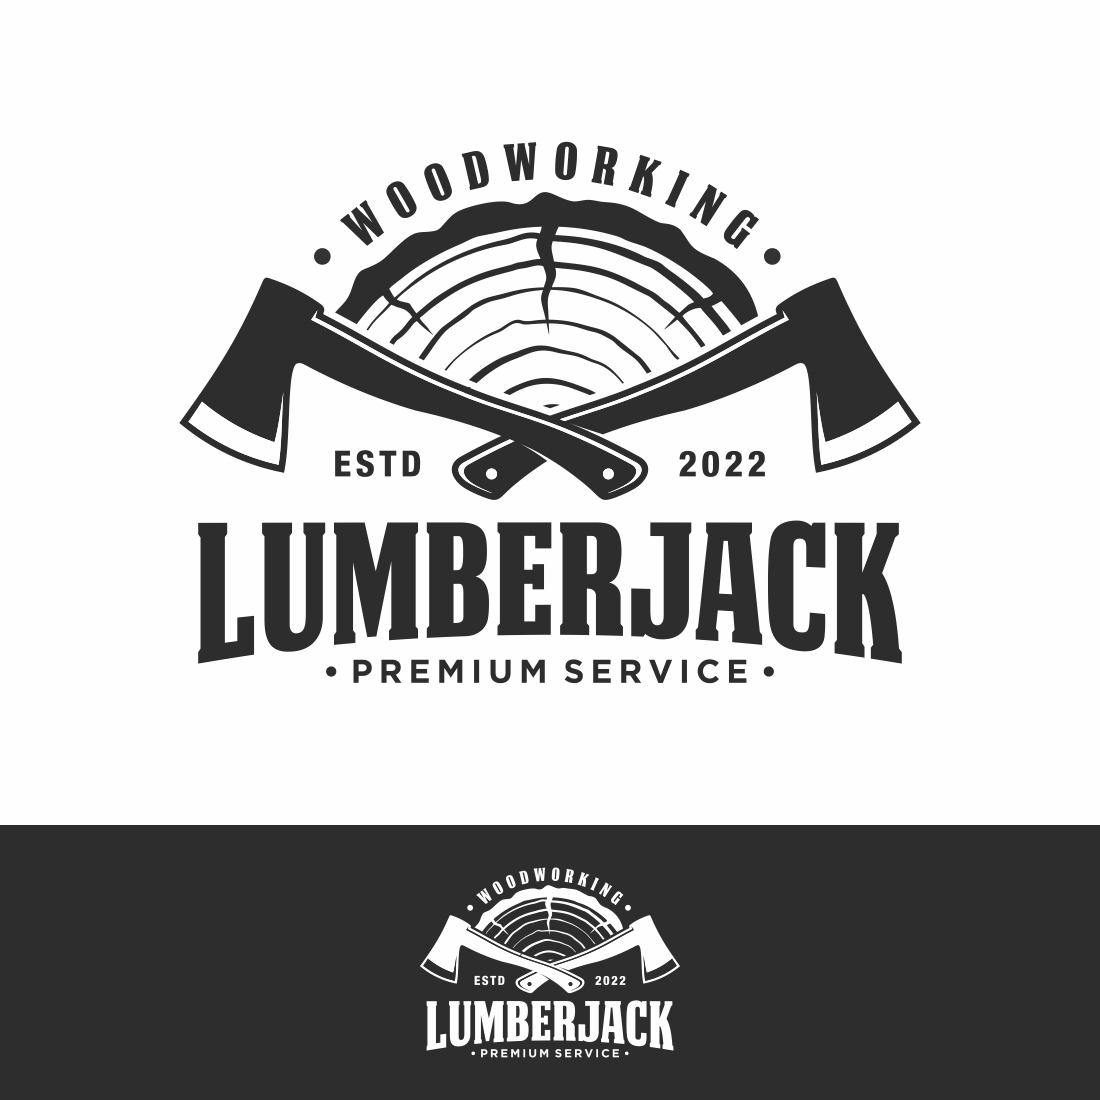 woodcutter logo design, badge, label or logo in vintage style – Only $6 preview image.